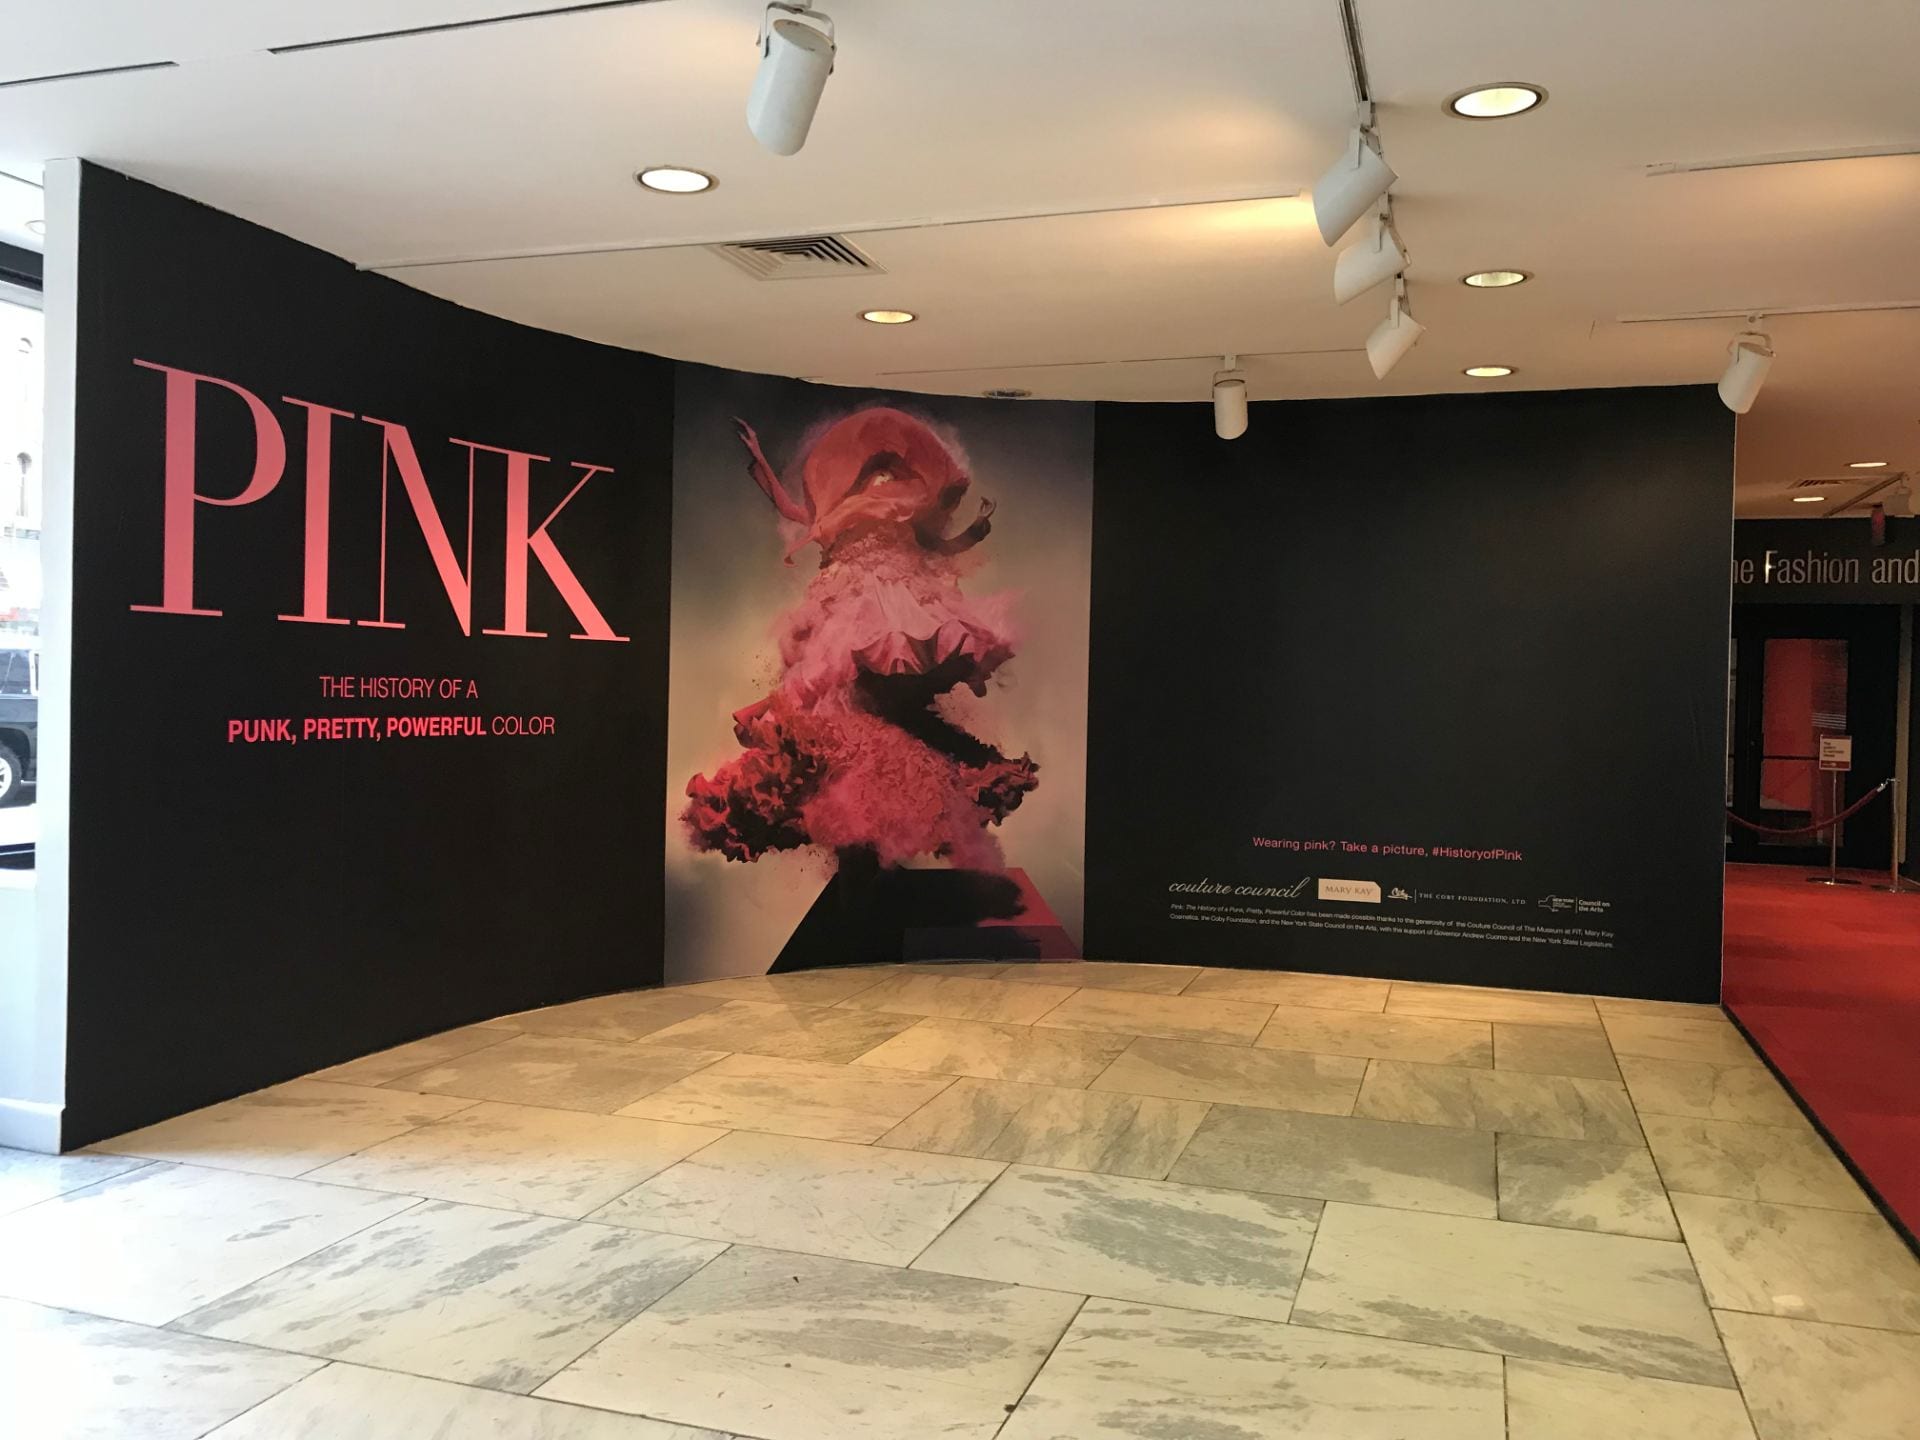 The World of PINK